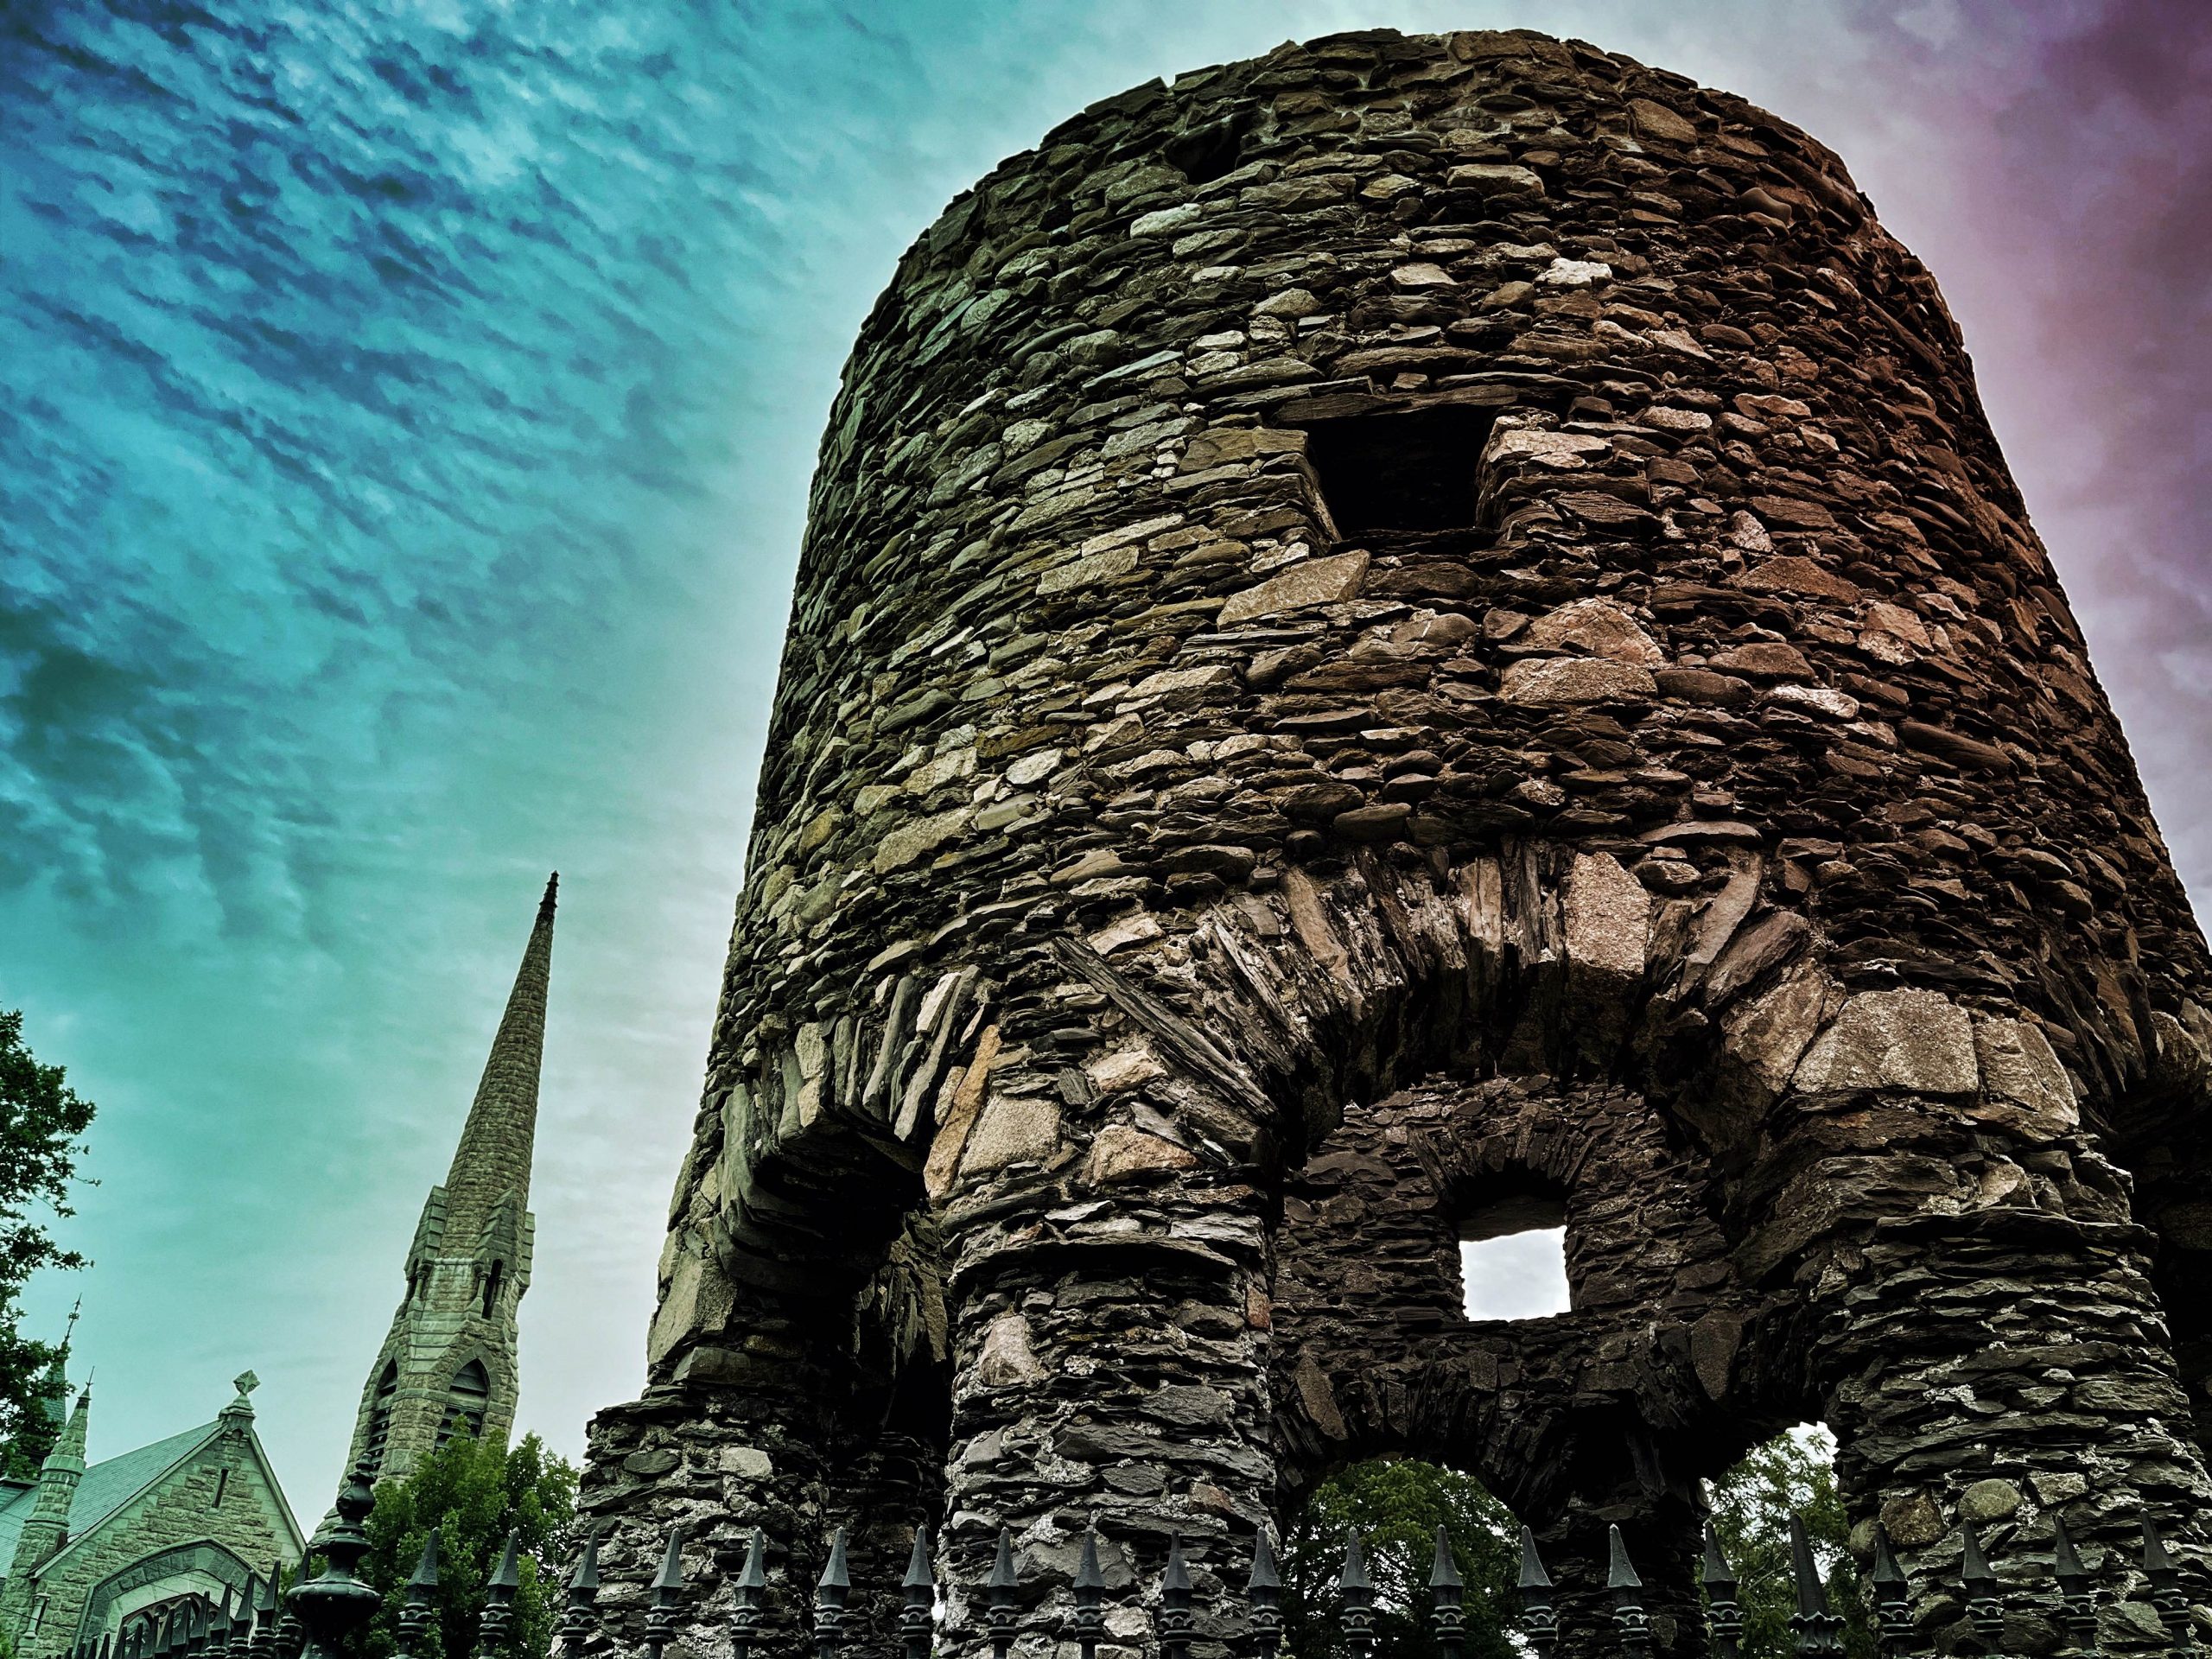 Upward Angle Spooky Photograph of The Haunted Newport Tower Stone Mill in Newport, RI, haunted location for the Newport Ghosts Haunted Tour